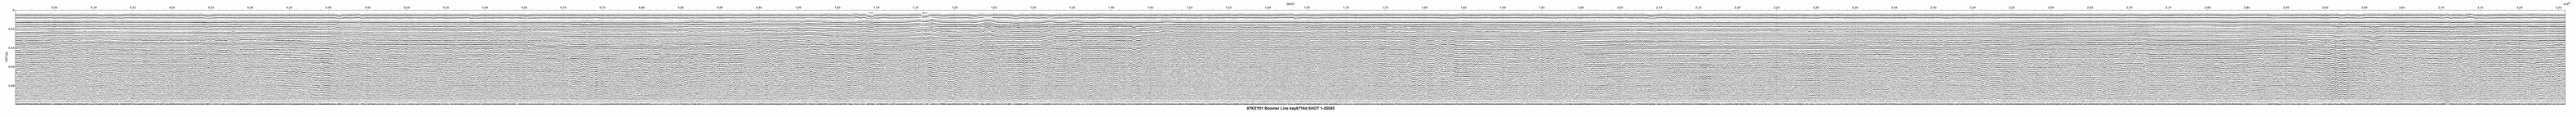 Thumbnail GIF image of the seismic trackline key9716d, with a hotlink to the more detailed, larger JPG image.